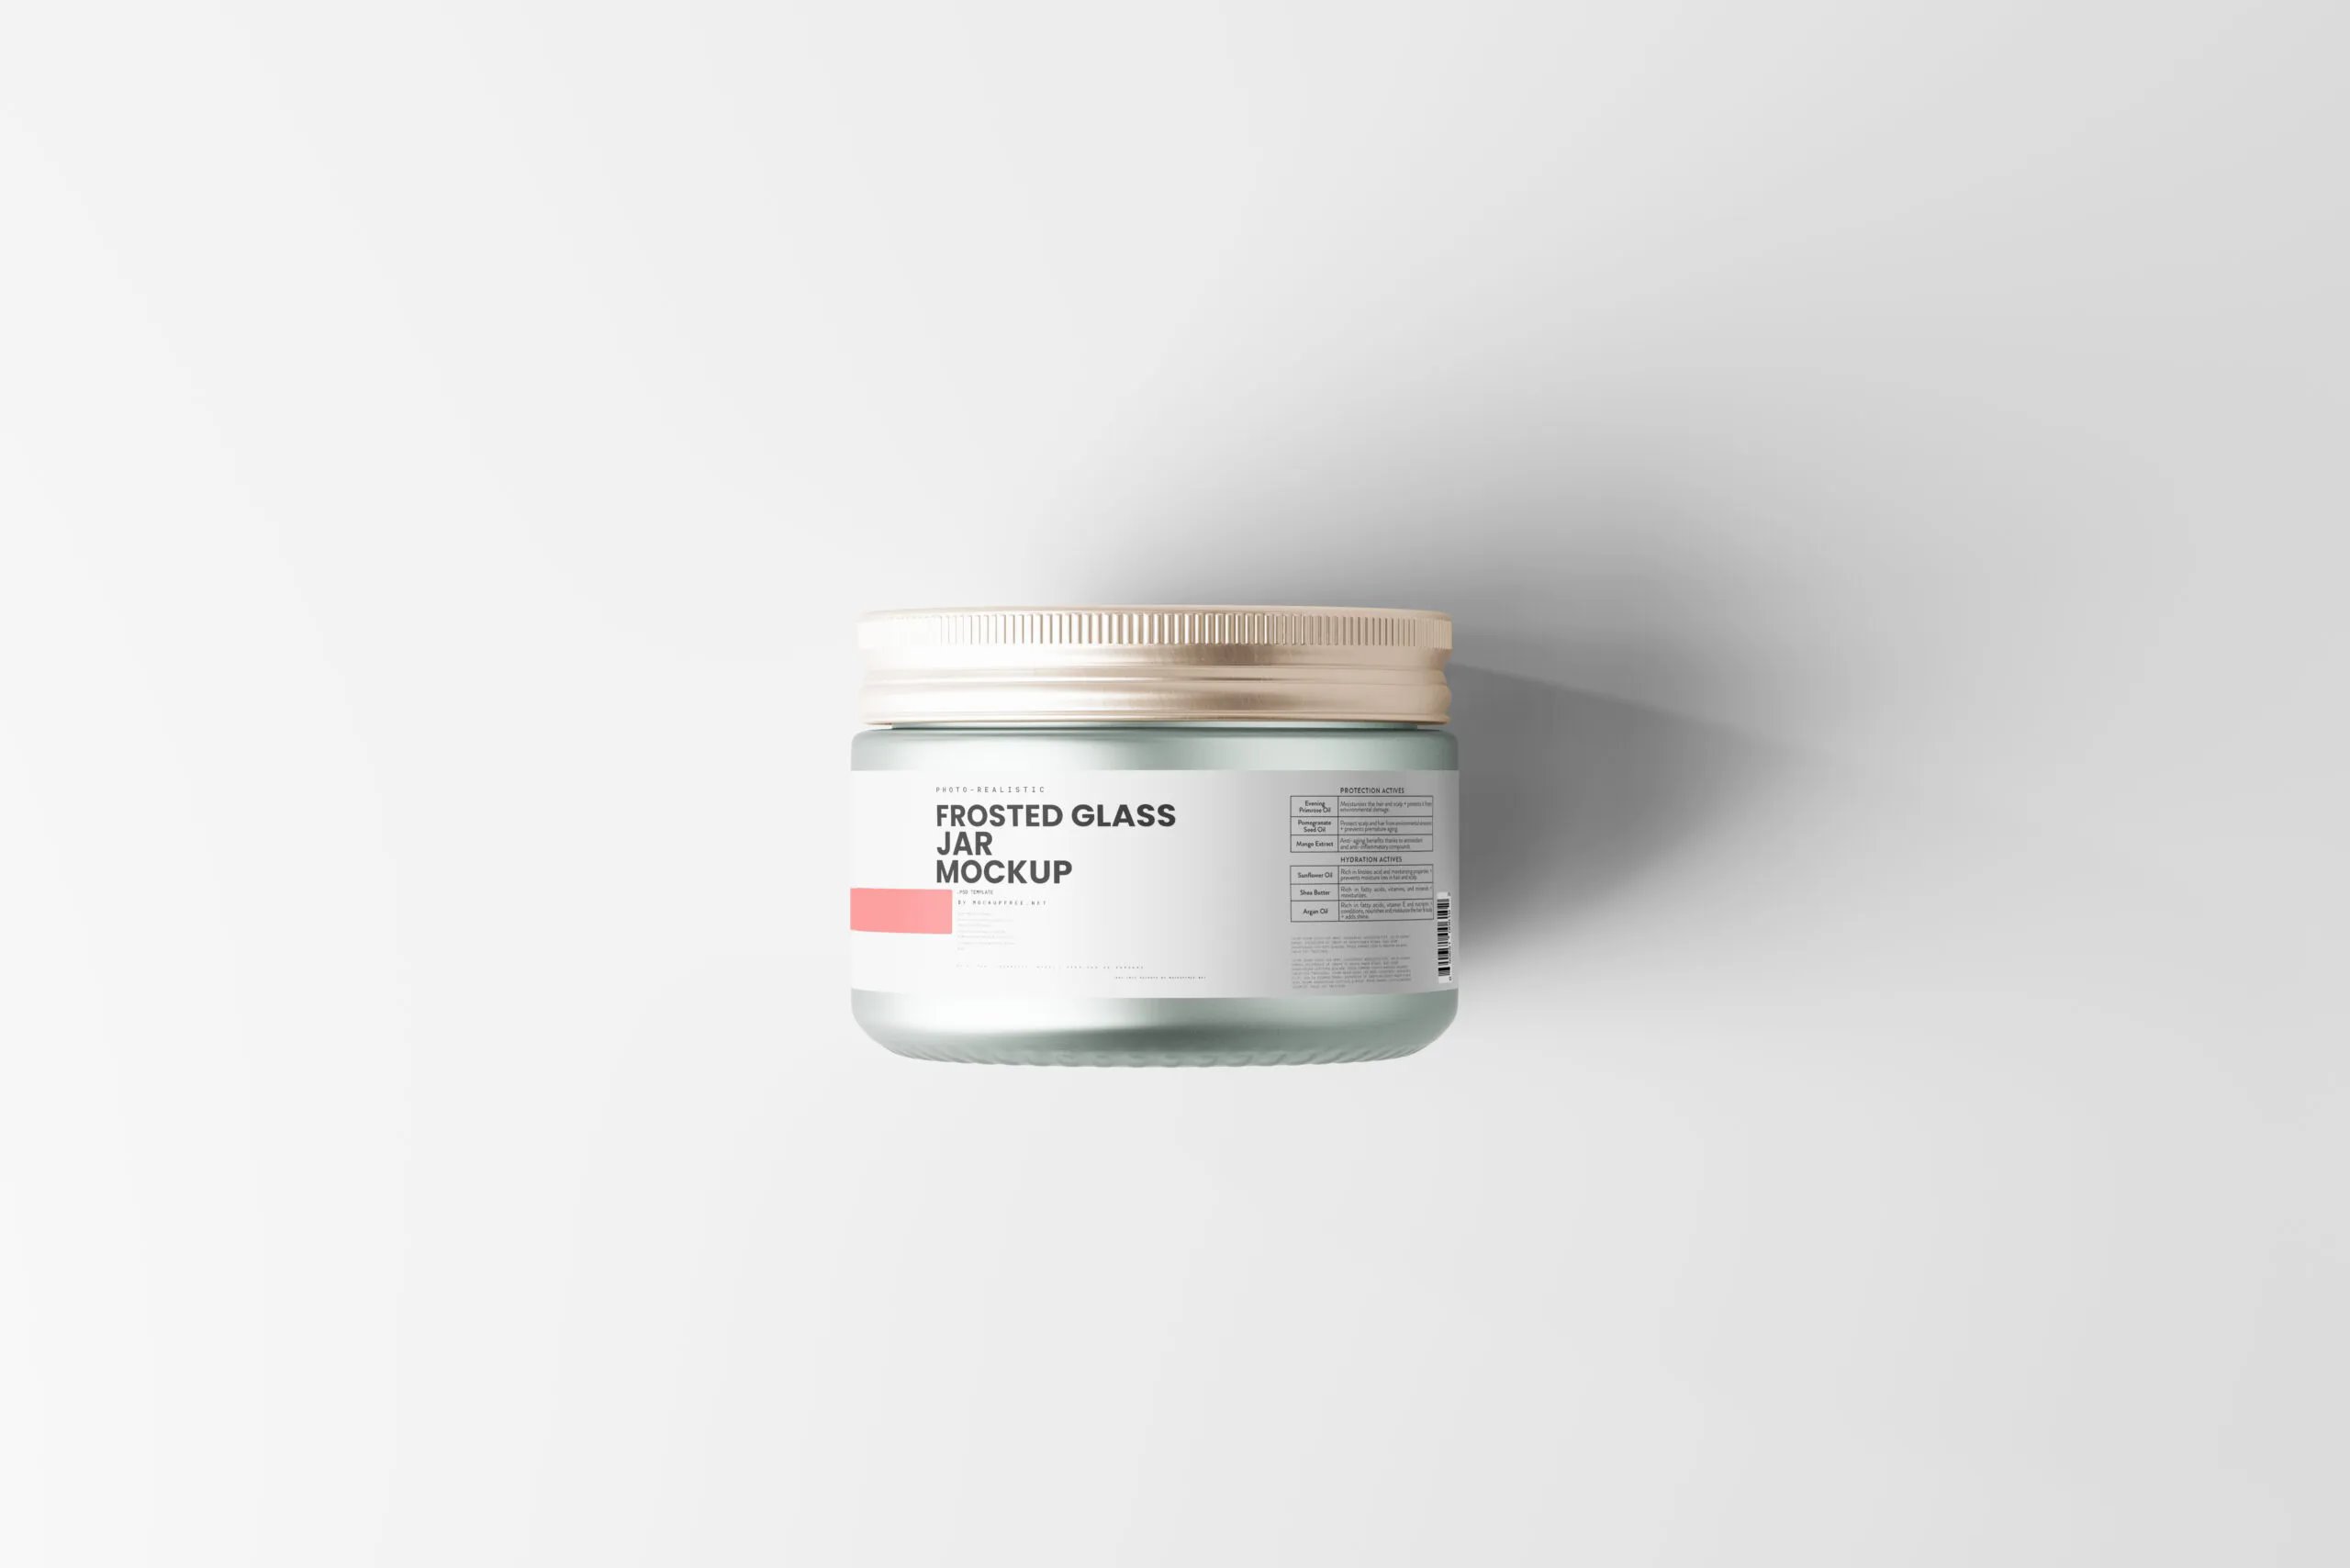 5 Mockups of Frosted Glass Jar with Label FREE PSD